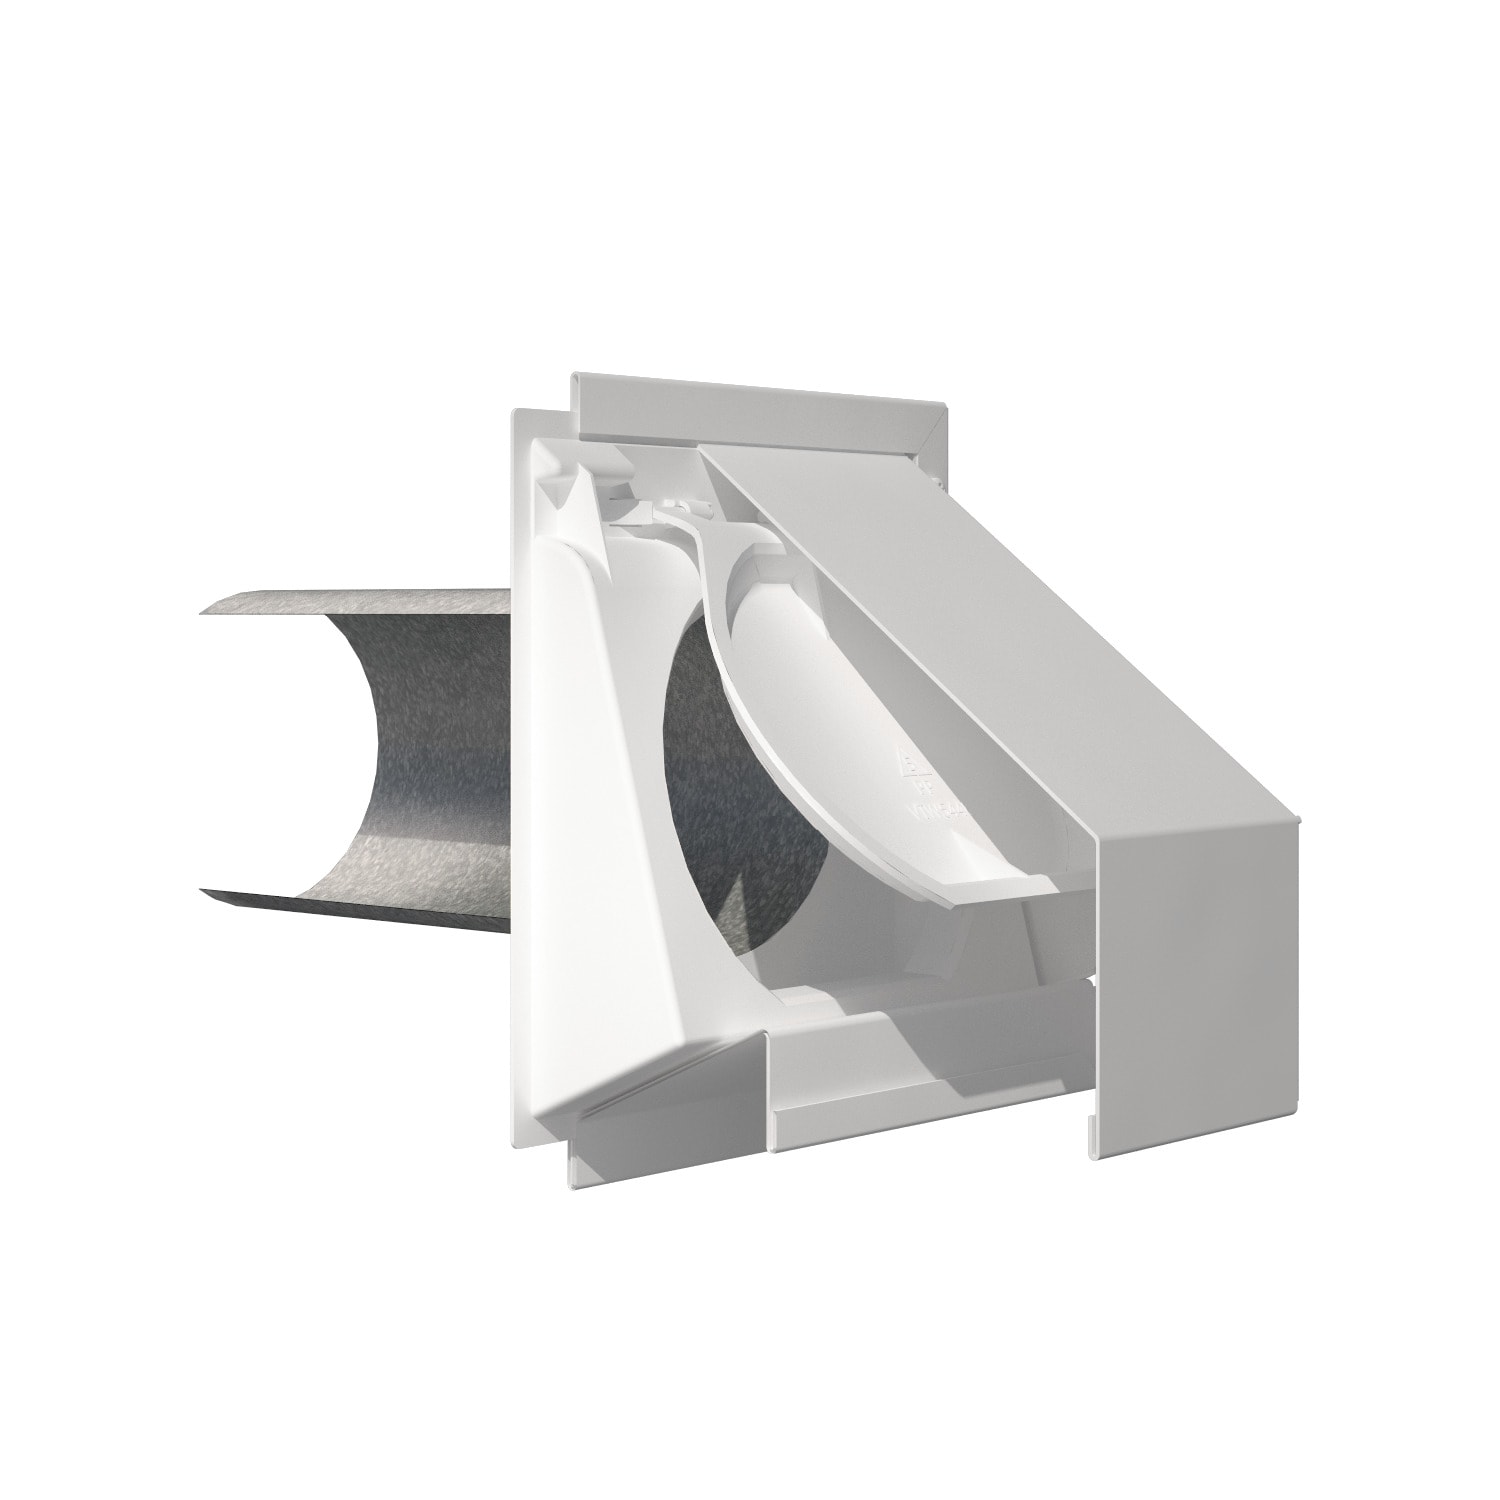 White Imperial Manufacturing VT0500 3.25-Inch by 10-Inch R2 Premium Range Exhaust Hood 